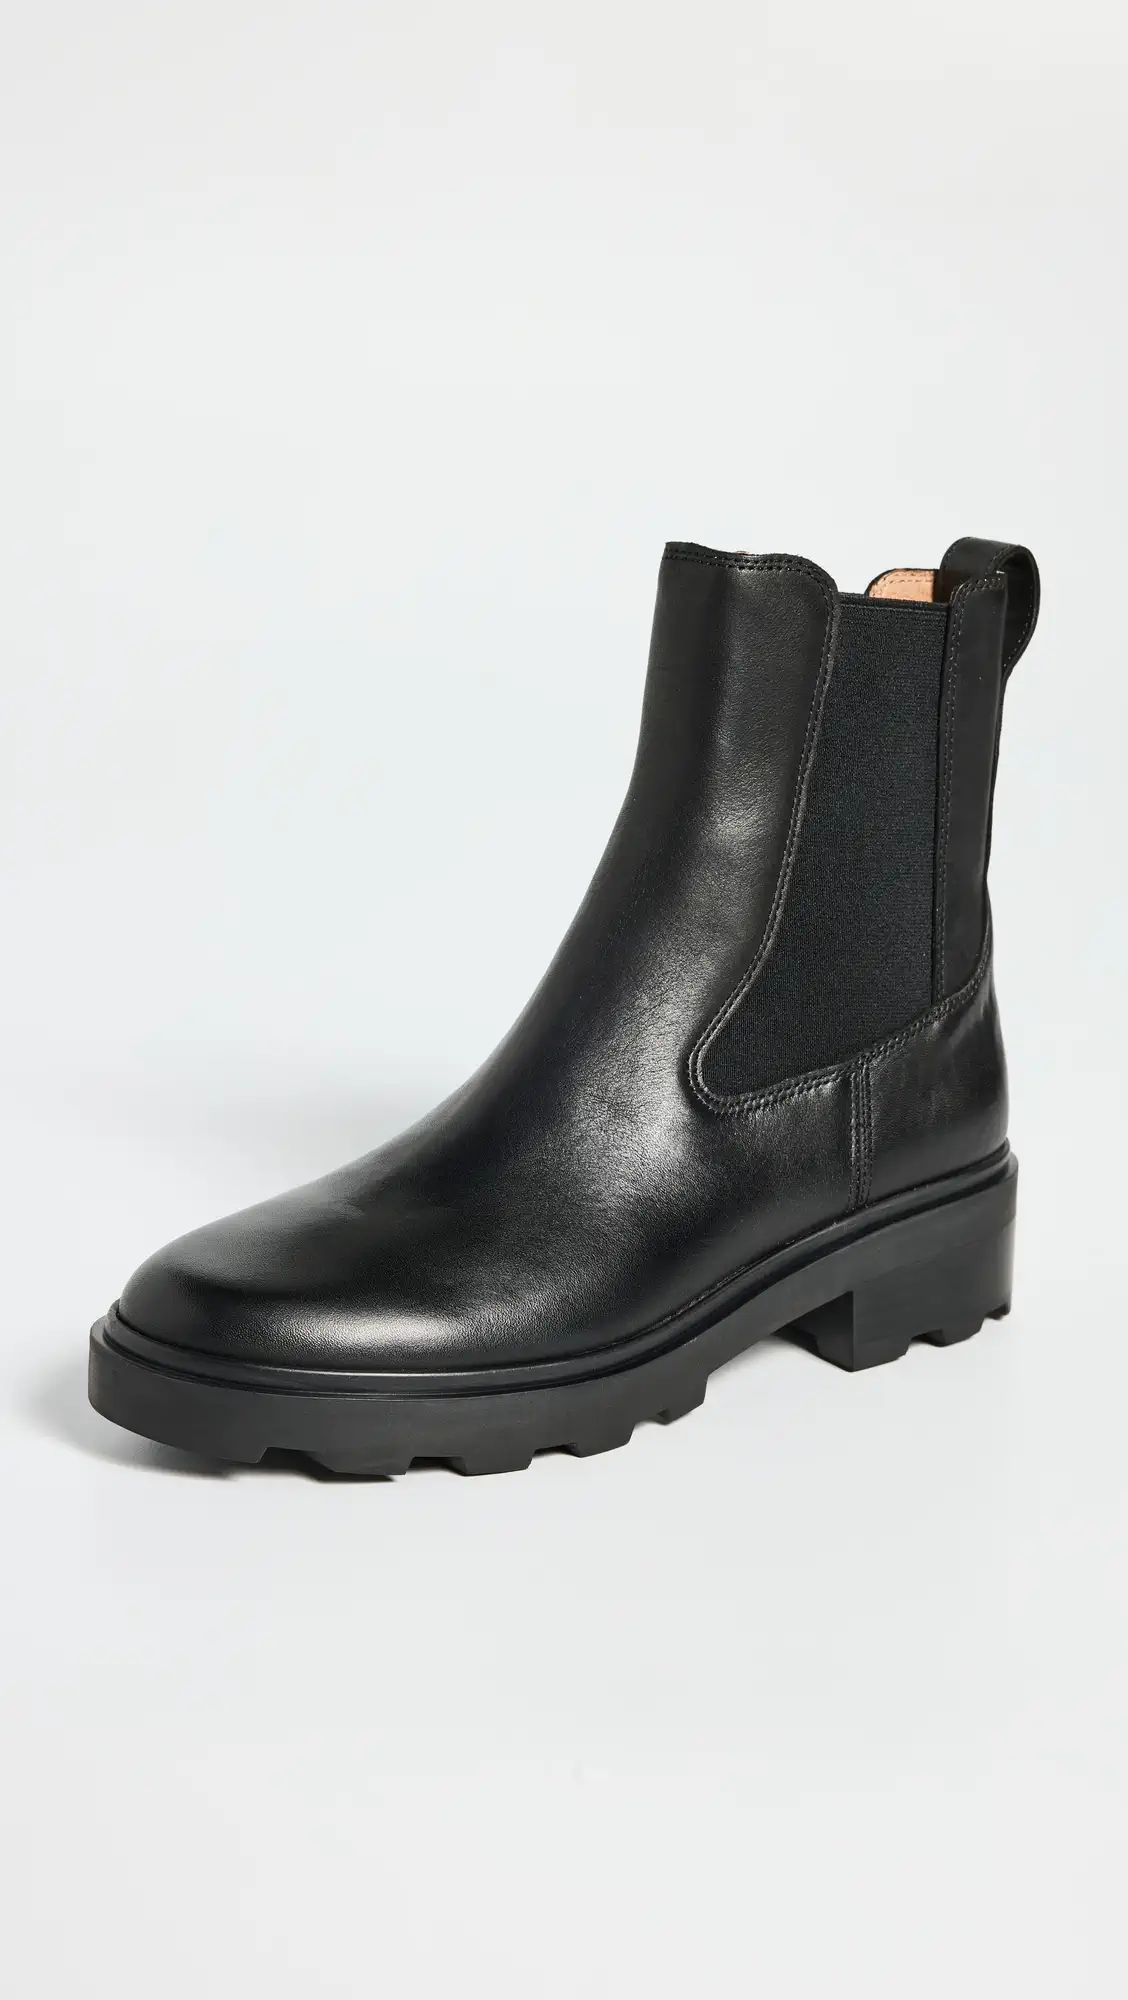 Madewell The Wyckoff Chelsea Lugsole Boot in Leather | Shopbop | Shopbop